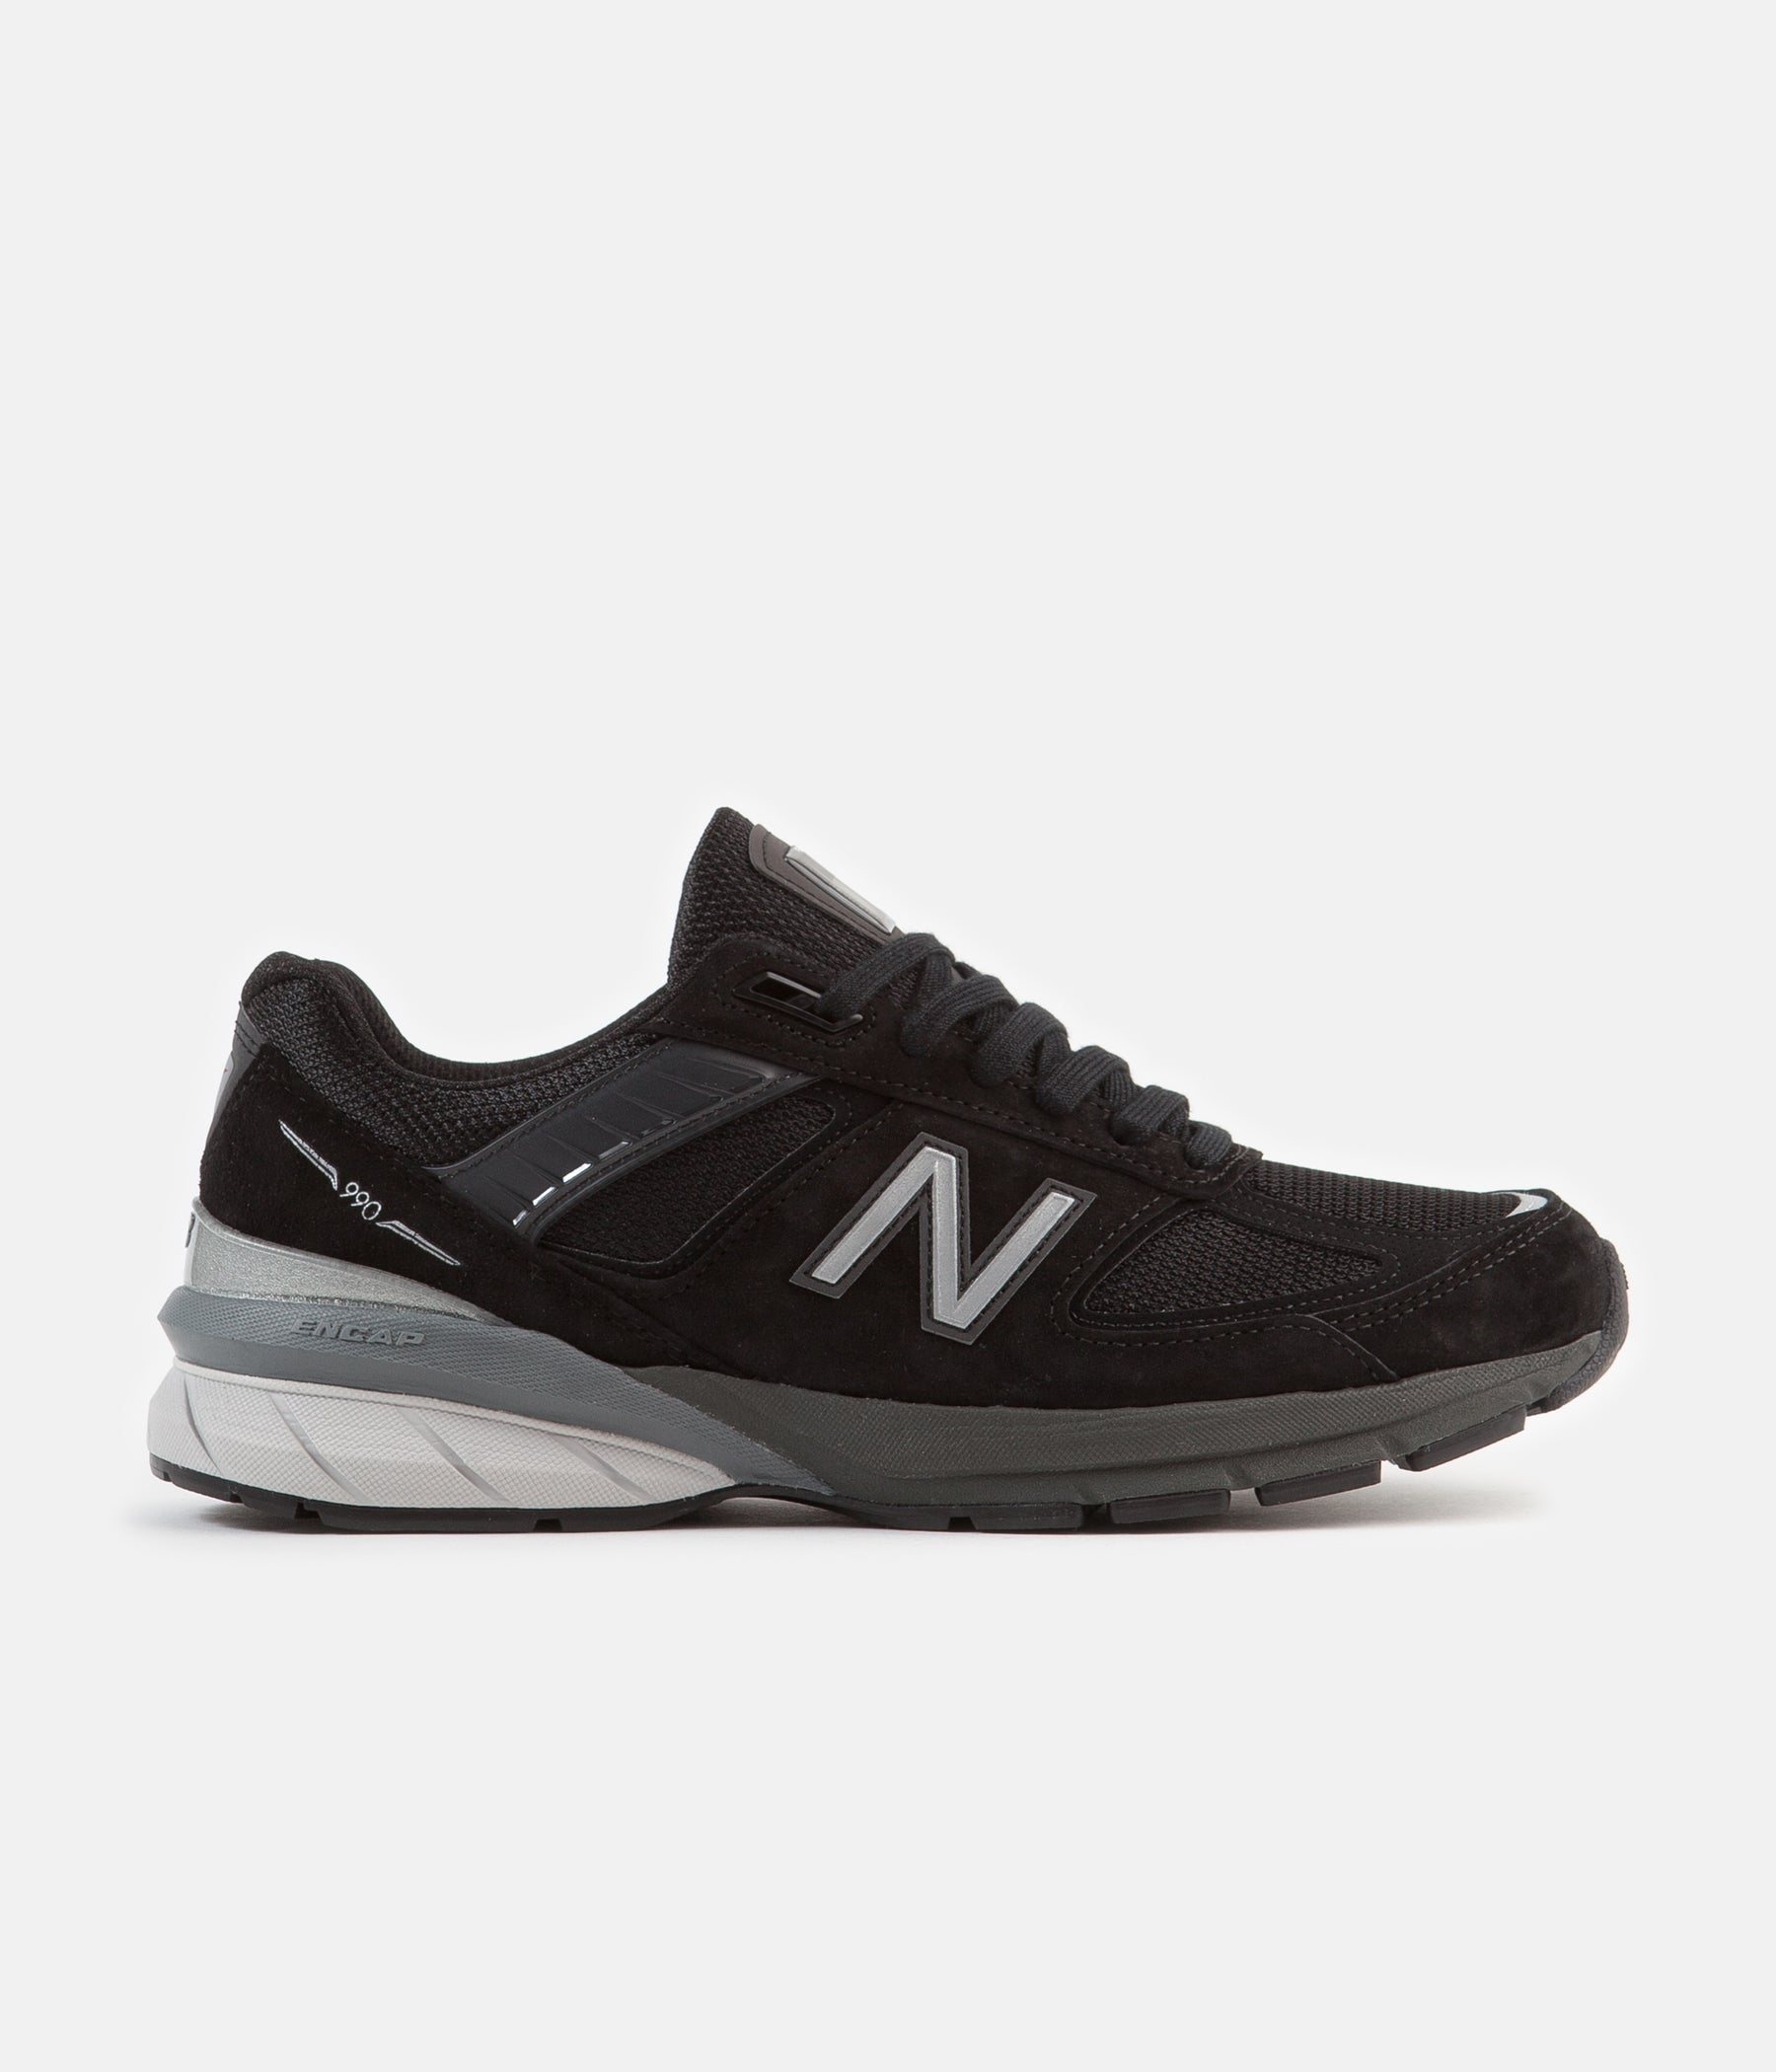 New Balance 990 v5 Made In US Shoes - Black / Silver | Always in Colour